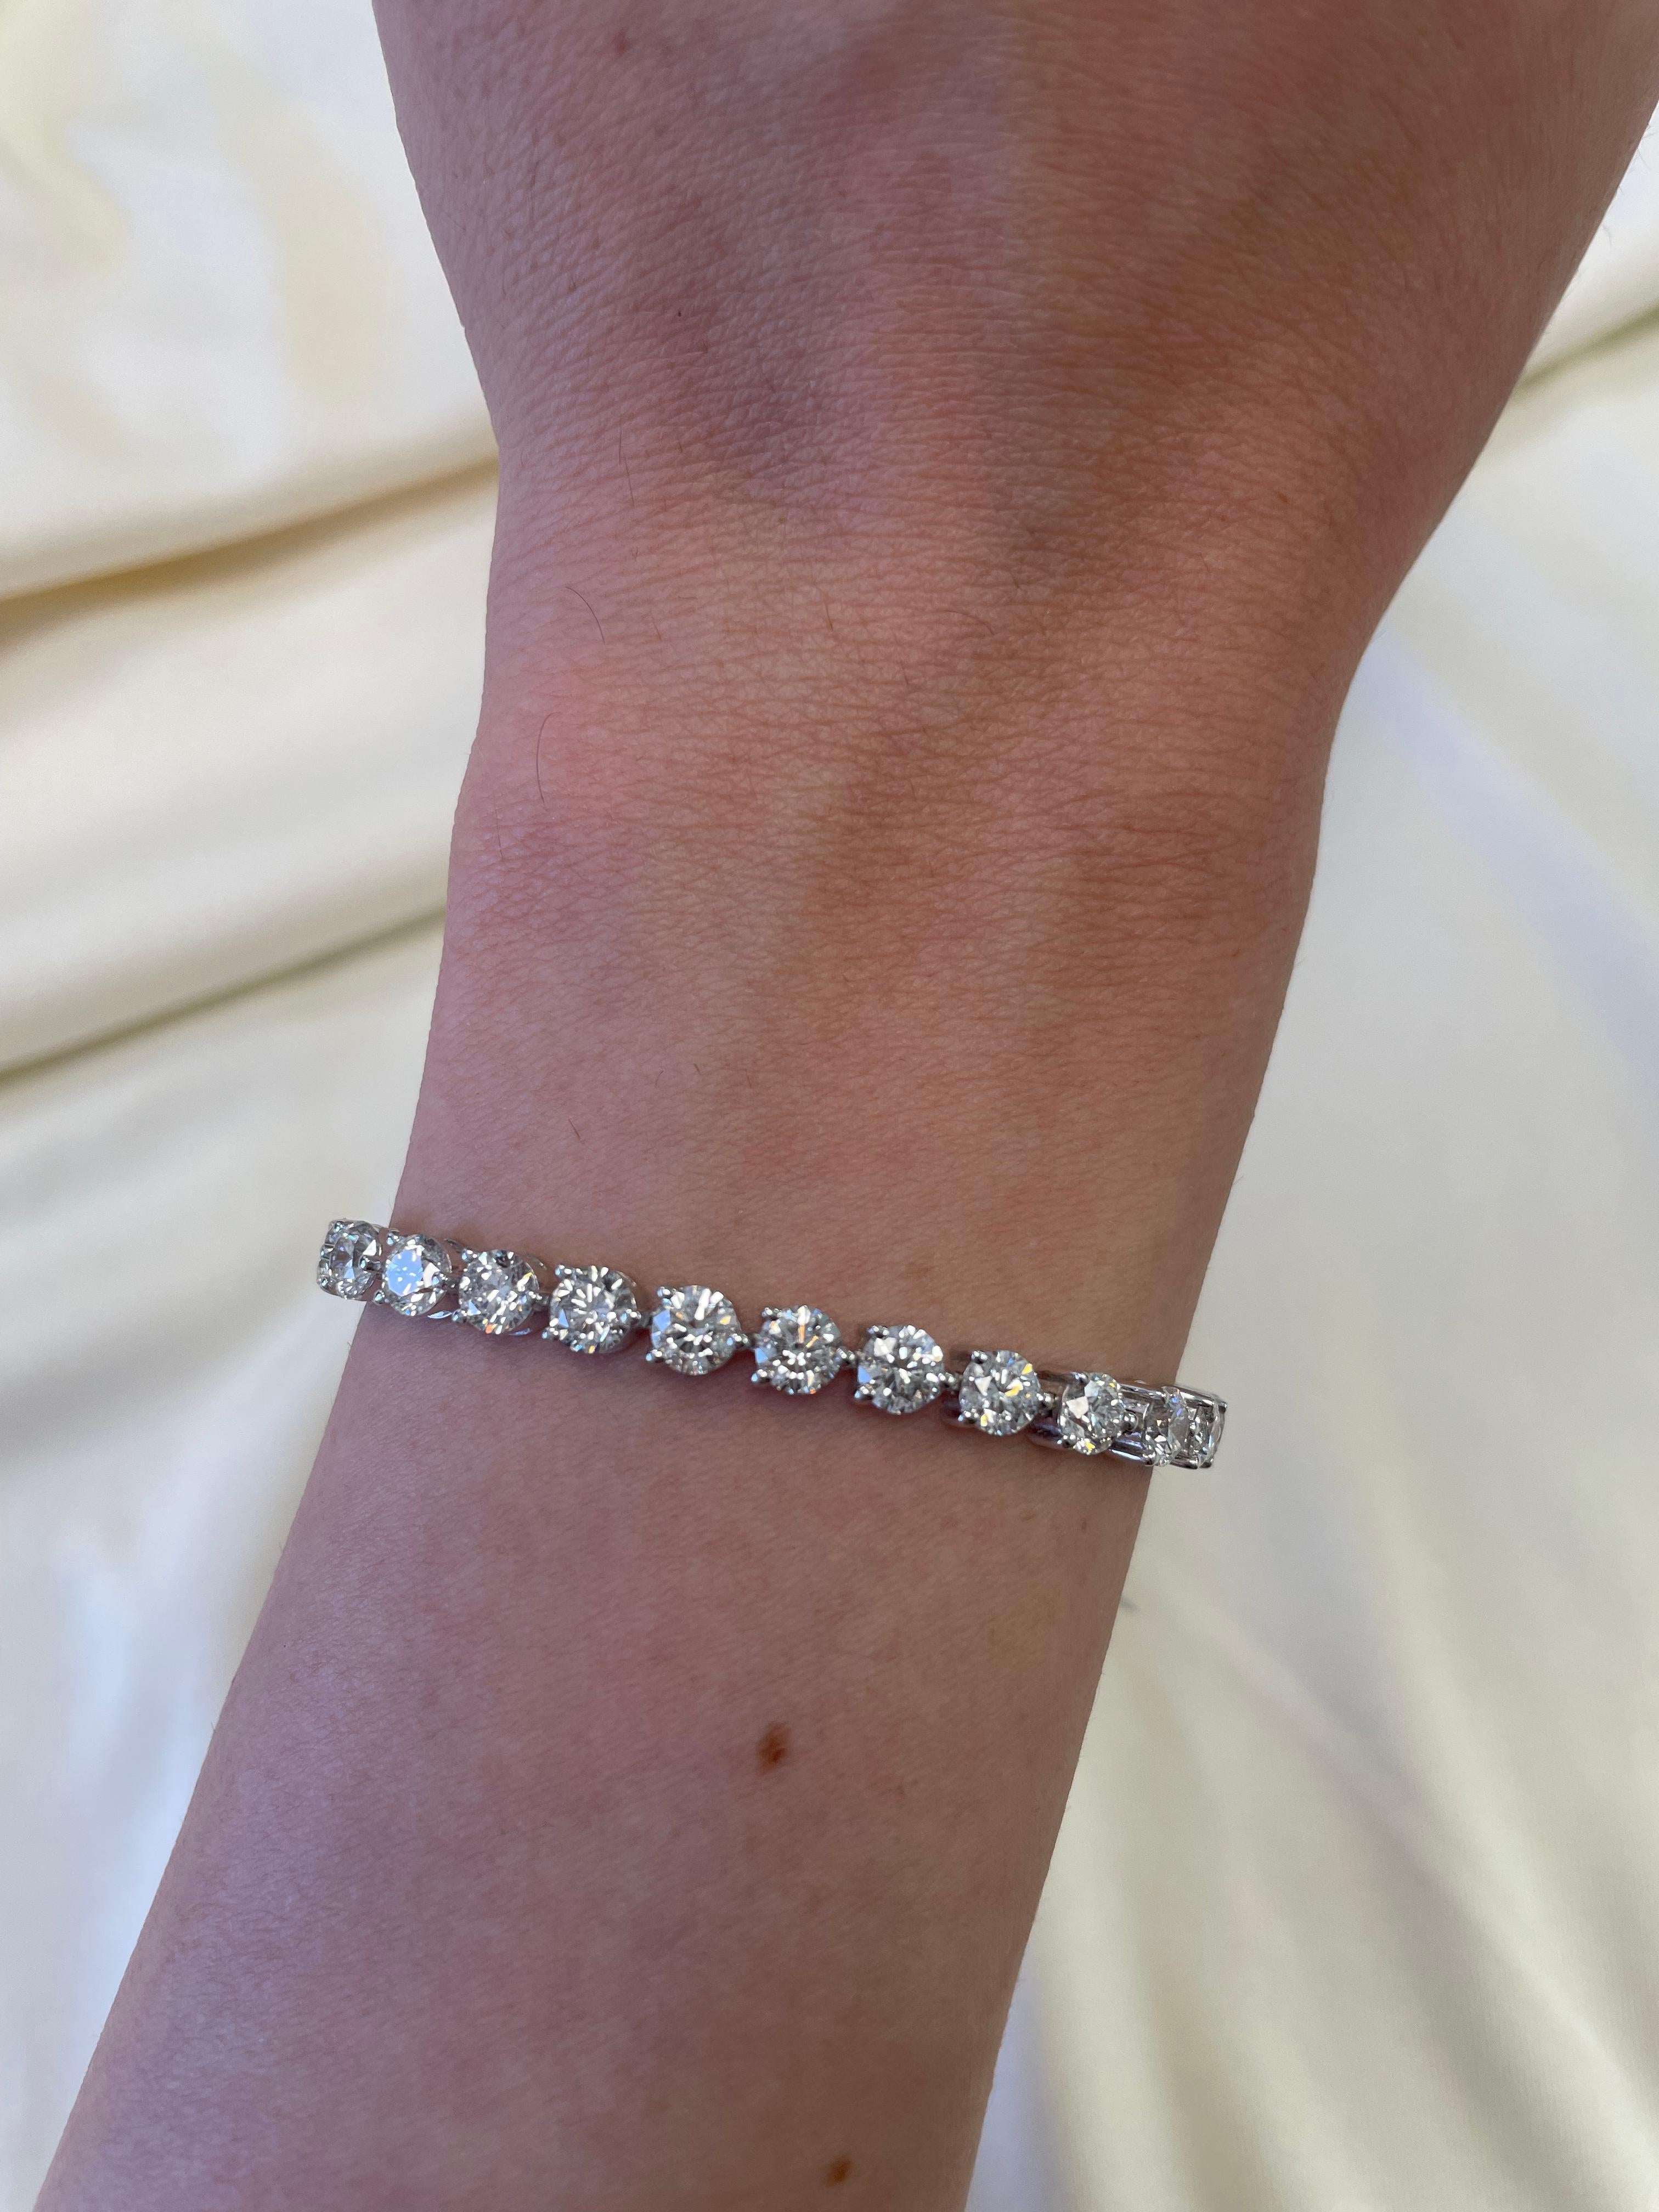 Beautiful and classic diamond tennis bracelet, by Alexander Beverly Hills.
35 round brilliant diamonds, 10.85 carats. Approximately E/F color and SI clarity. 14k white gold, 12.27 grams, three prong set, 7in.
Accommodated with an up-to-date digital